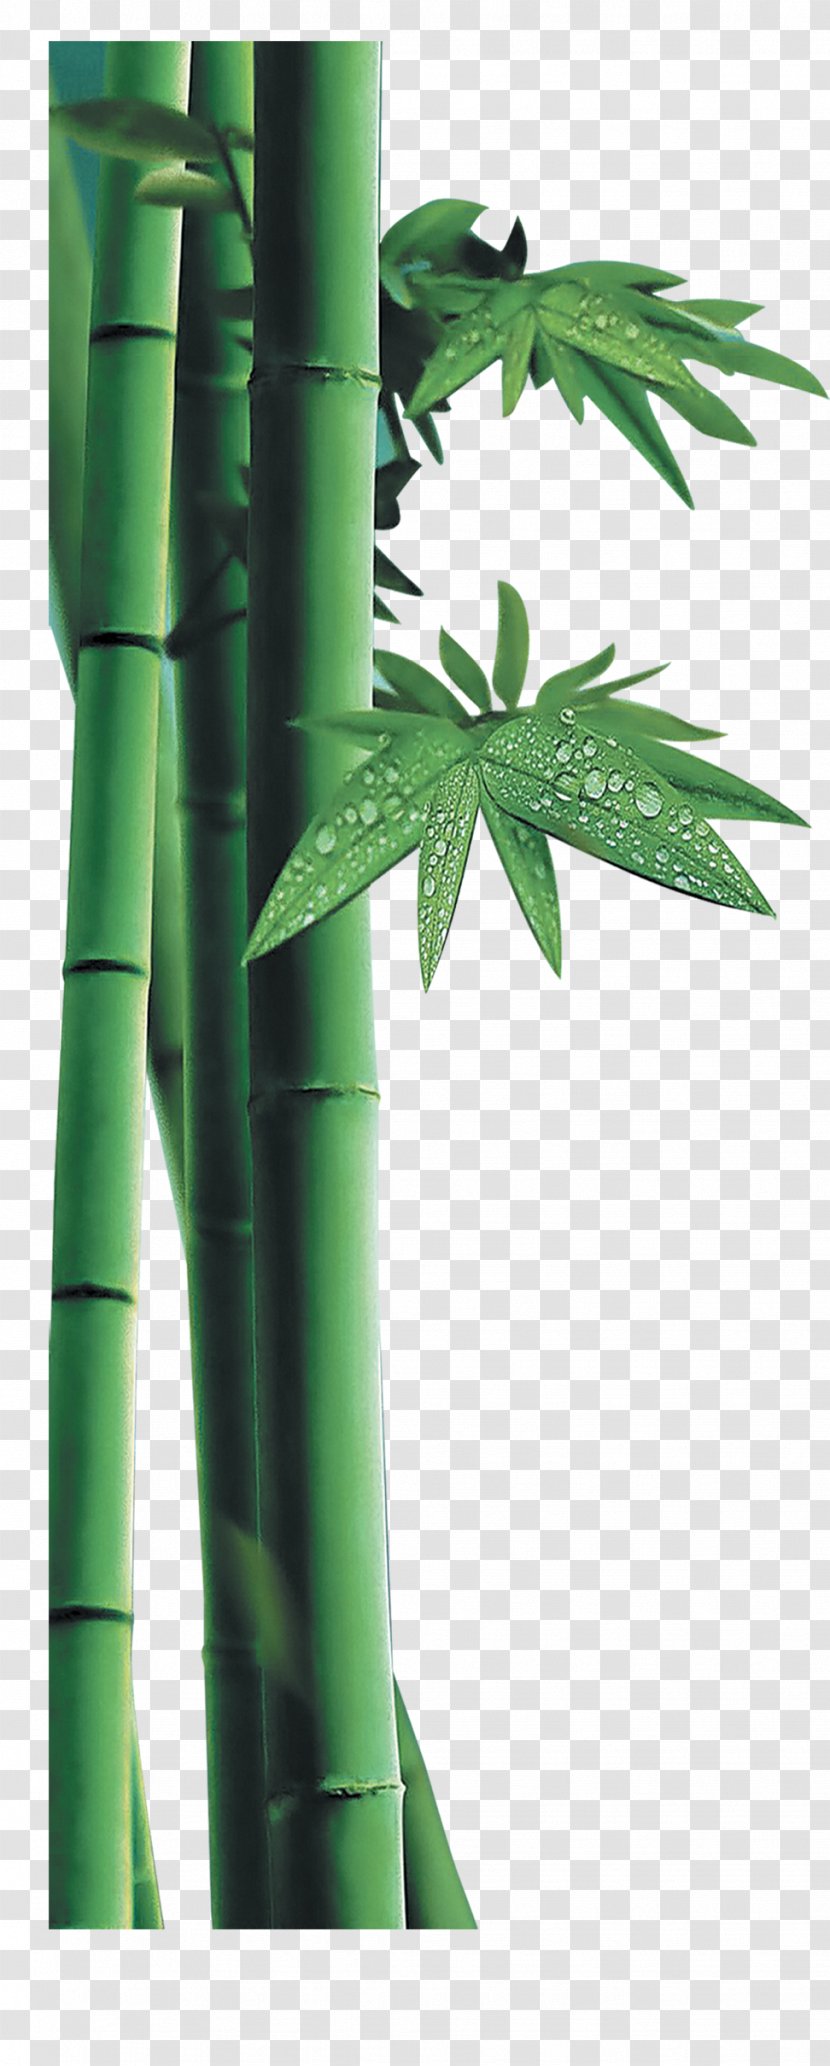 Bamboo Download - Animation Transparent PNG